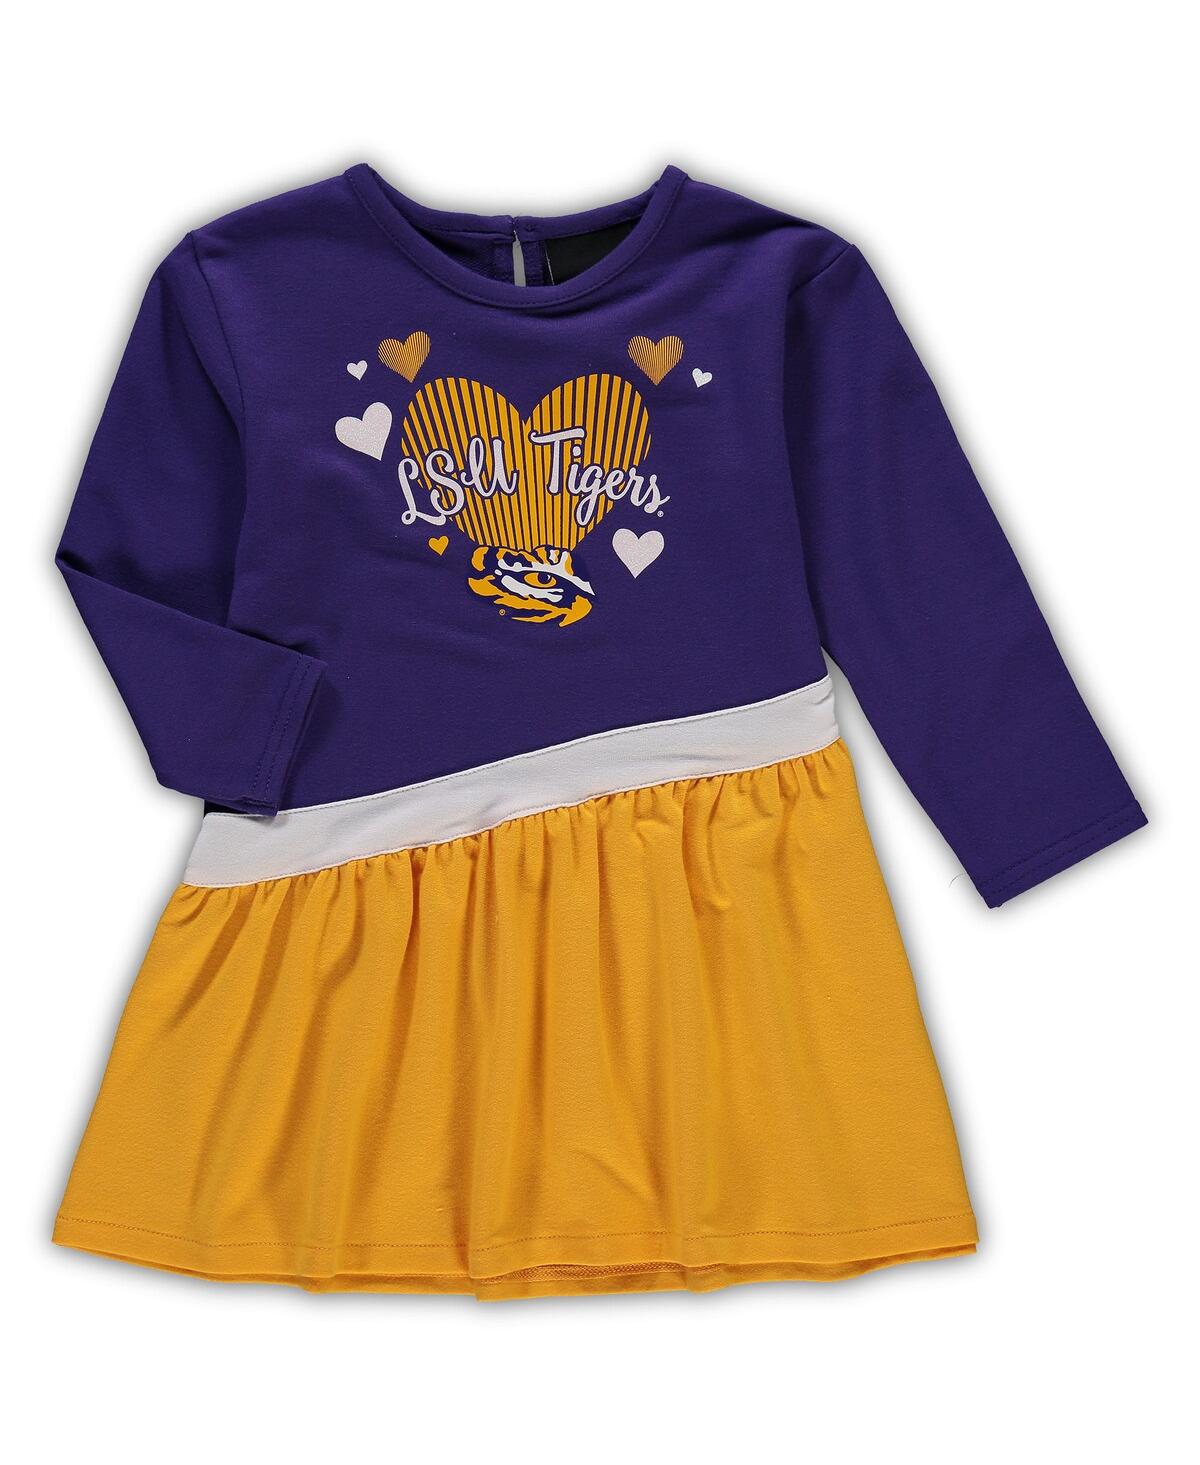 Outerstuff Babies' Girls Infant Purple Lsu Tigers Heart French Terry Dress